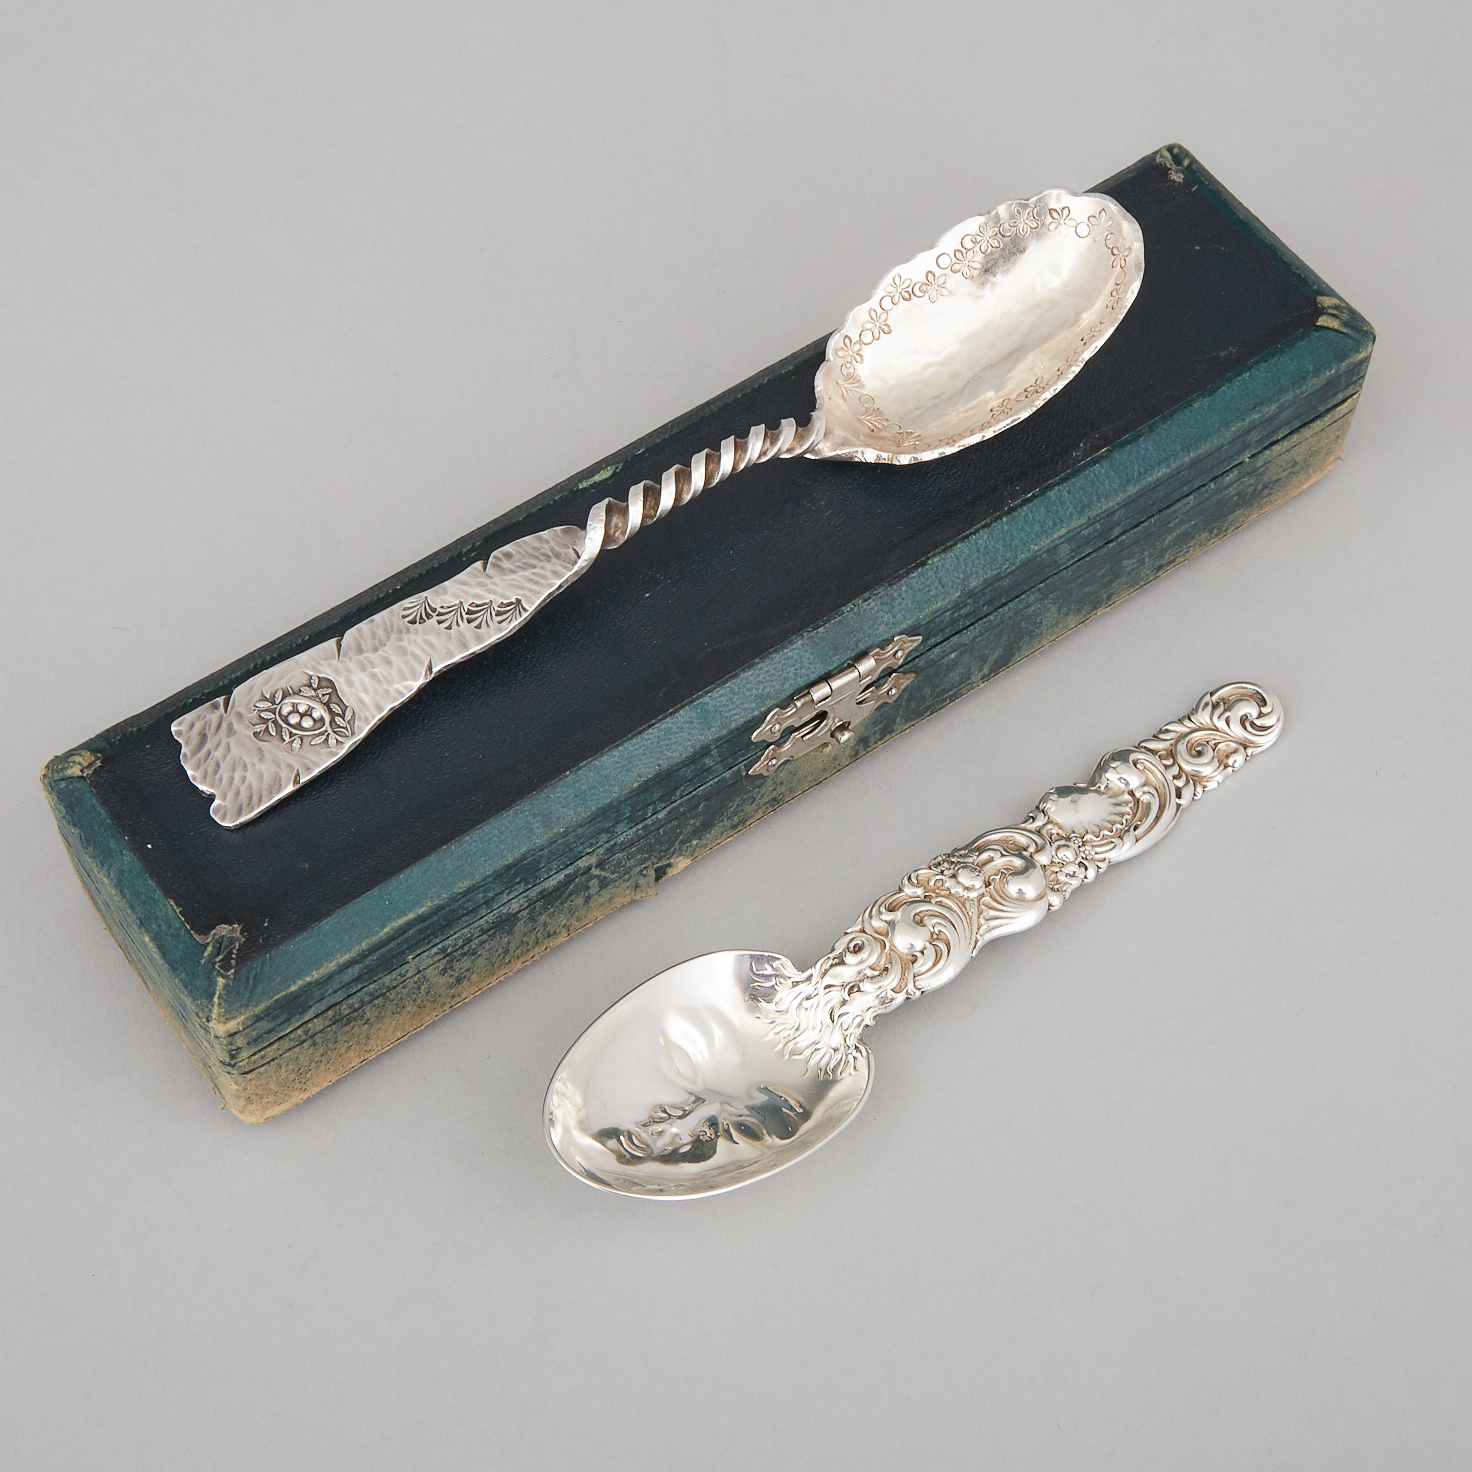 Two American Silver Novelty Spoons, Duhme & Co., Cincinnati, OH, and Whiting Mfg. Co., New York, N.Y., late 19th century